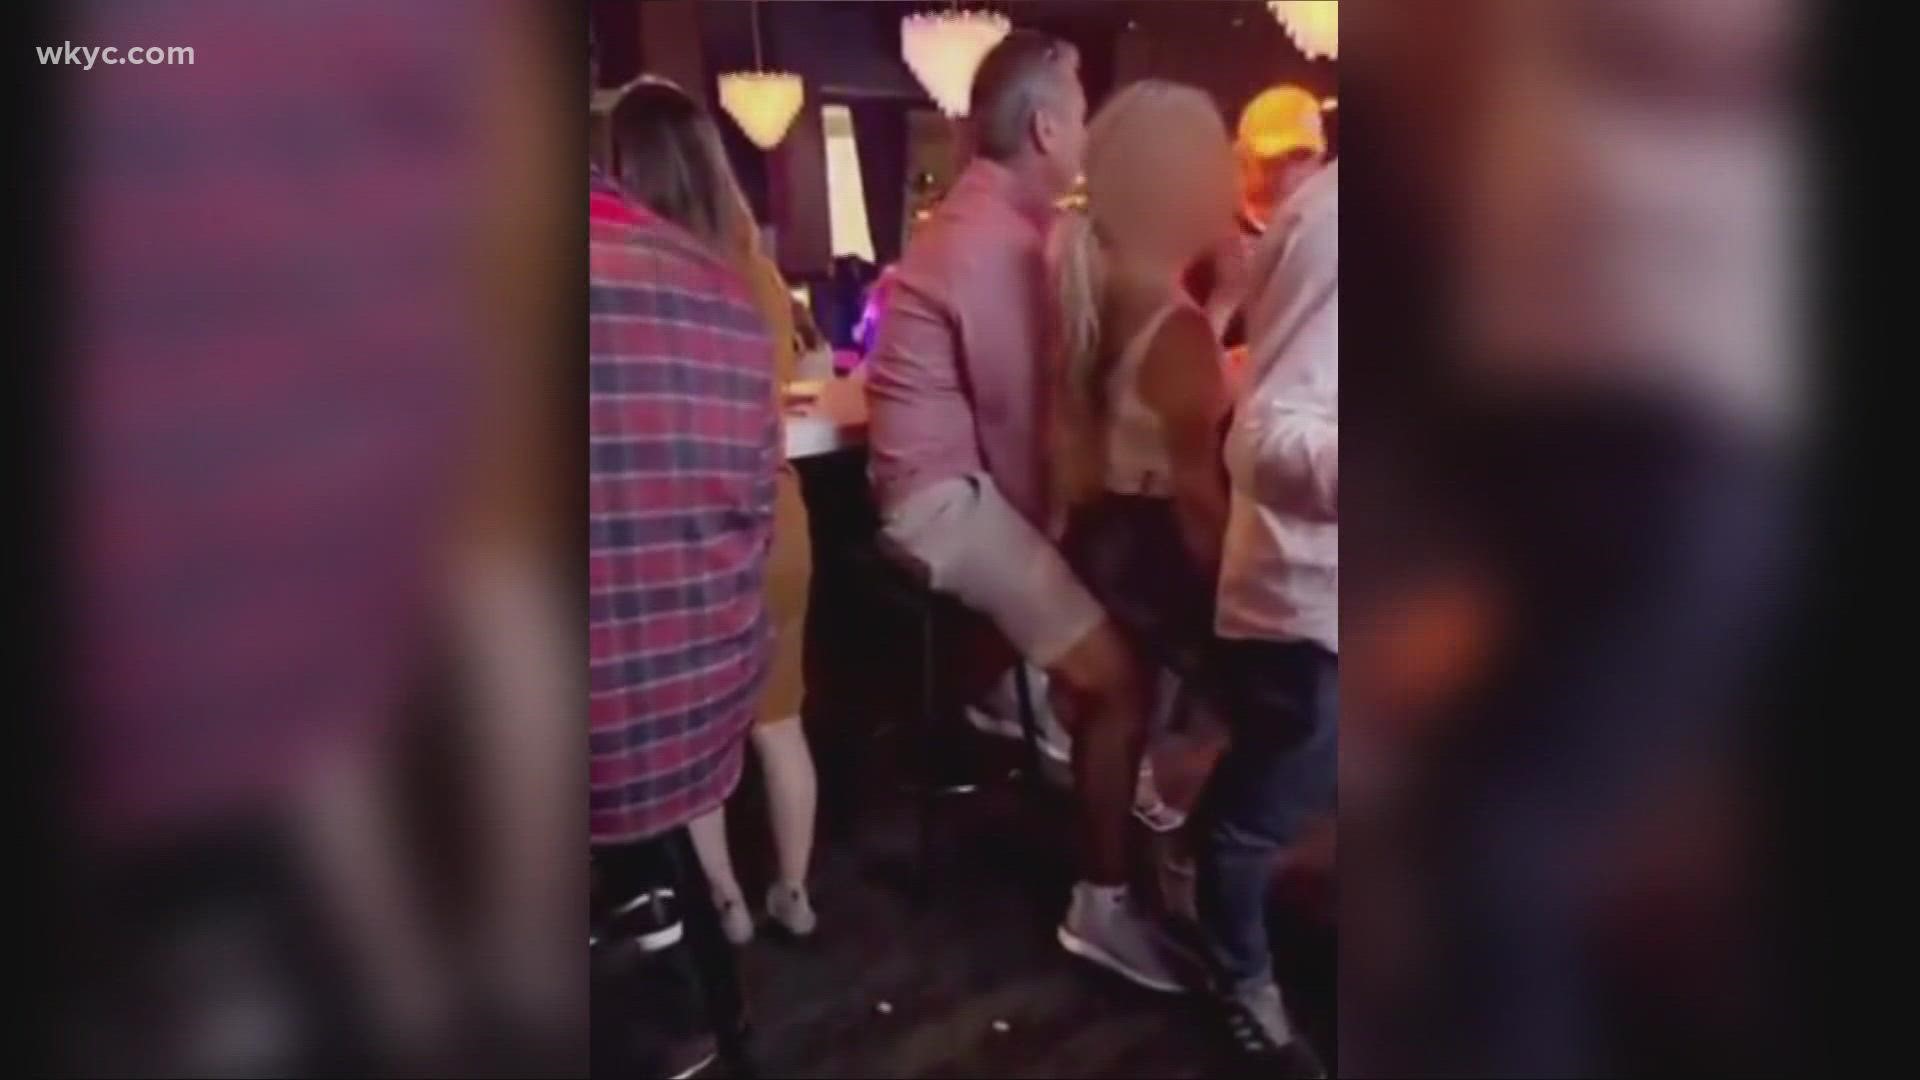 As Urban Meyer gained no shortage of attention for a viral video that showed a woman who isn't his wife dancing against him at a Columbus, Ohio.